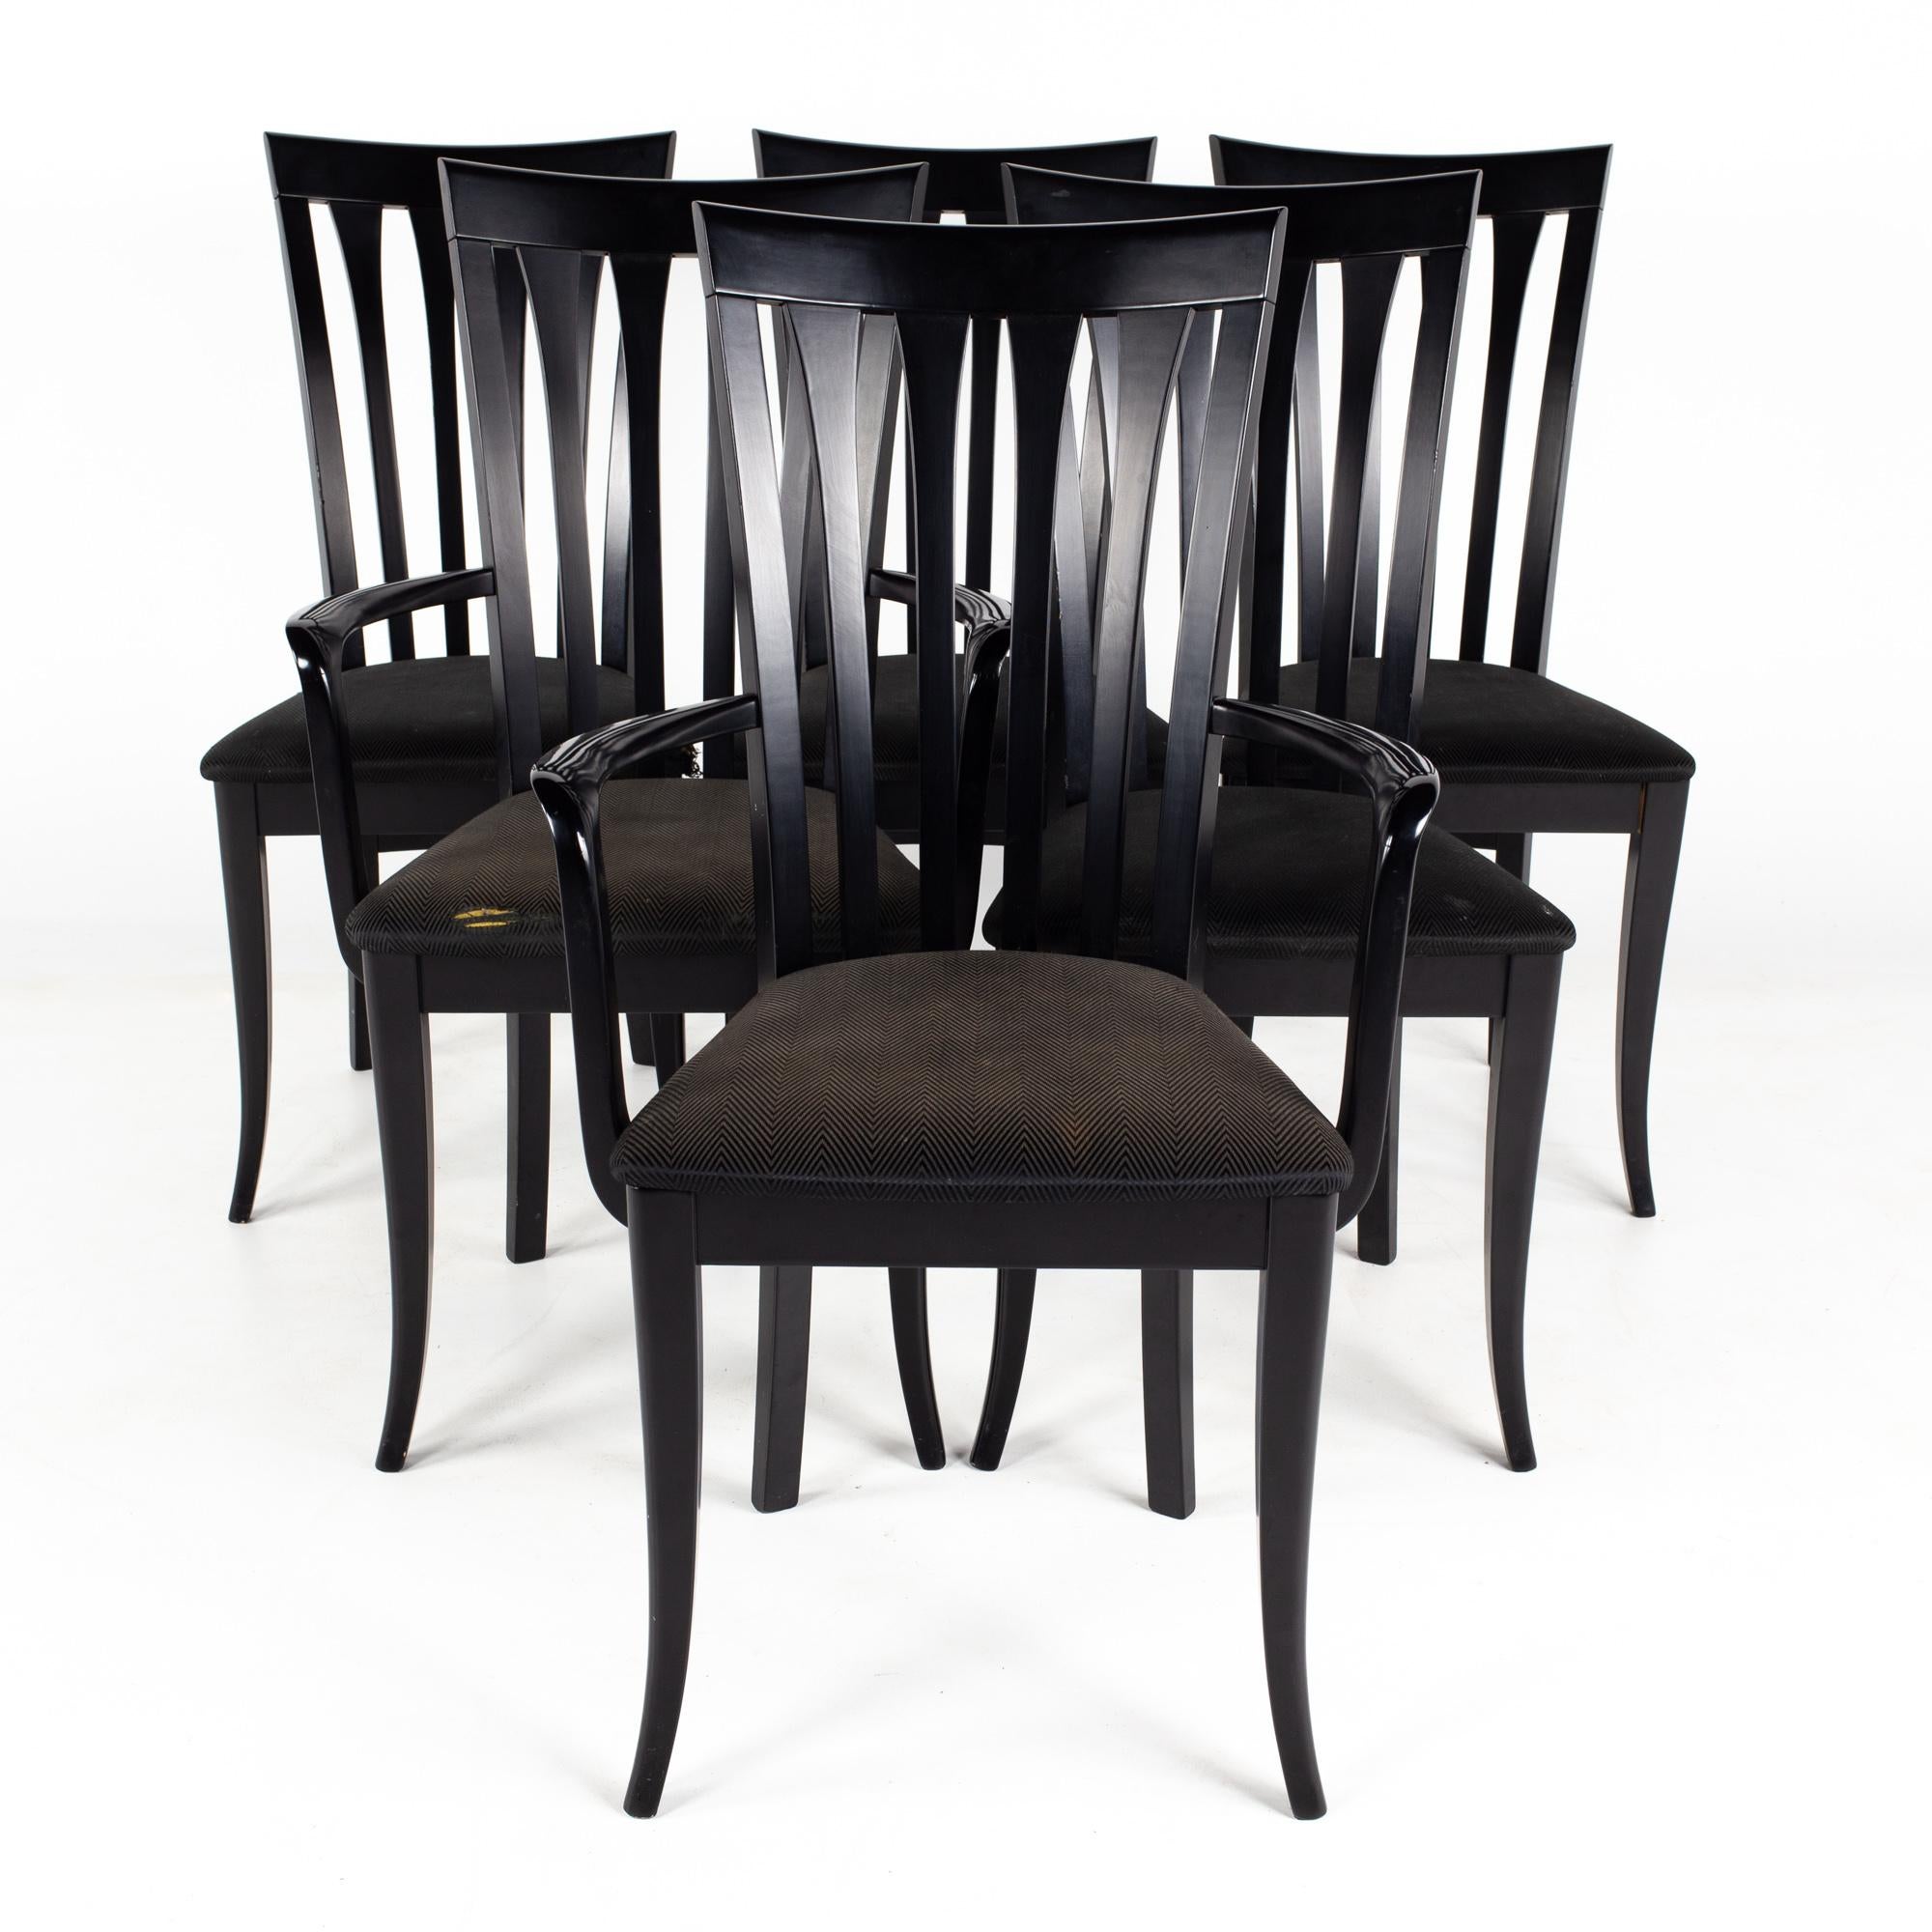 A Sibau Italian black high back dining chairs - Set of 6

Each chair measures: 18.5 wide x 20.5 deep x 38.5 inches high, with a seat height of 18 and arm height of 26.5 inches

About Photos: We take our photos in a controlled lighting studio to show